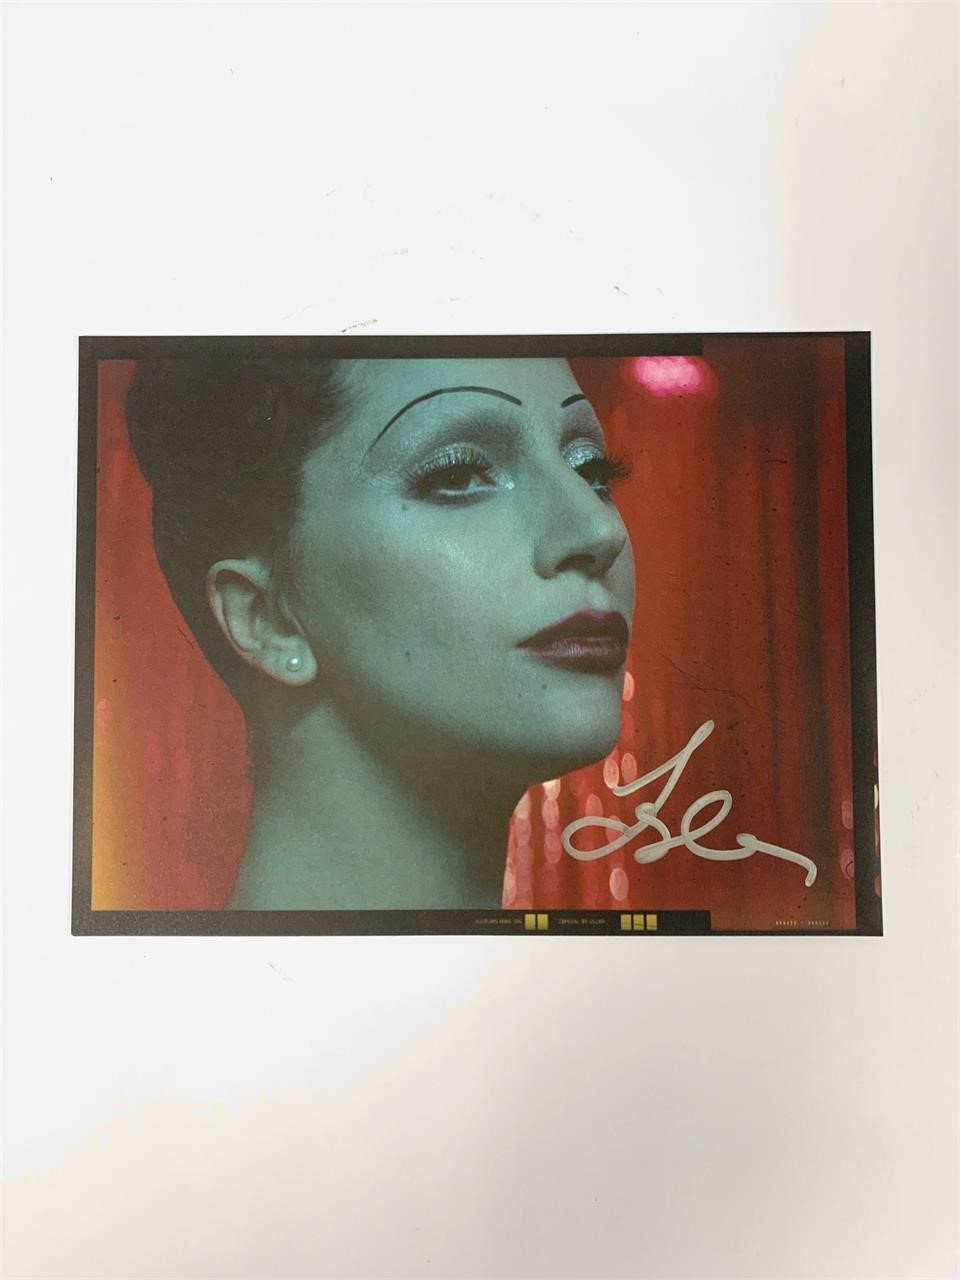 Autograph Signed A Star is Born Photo Card